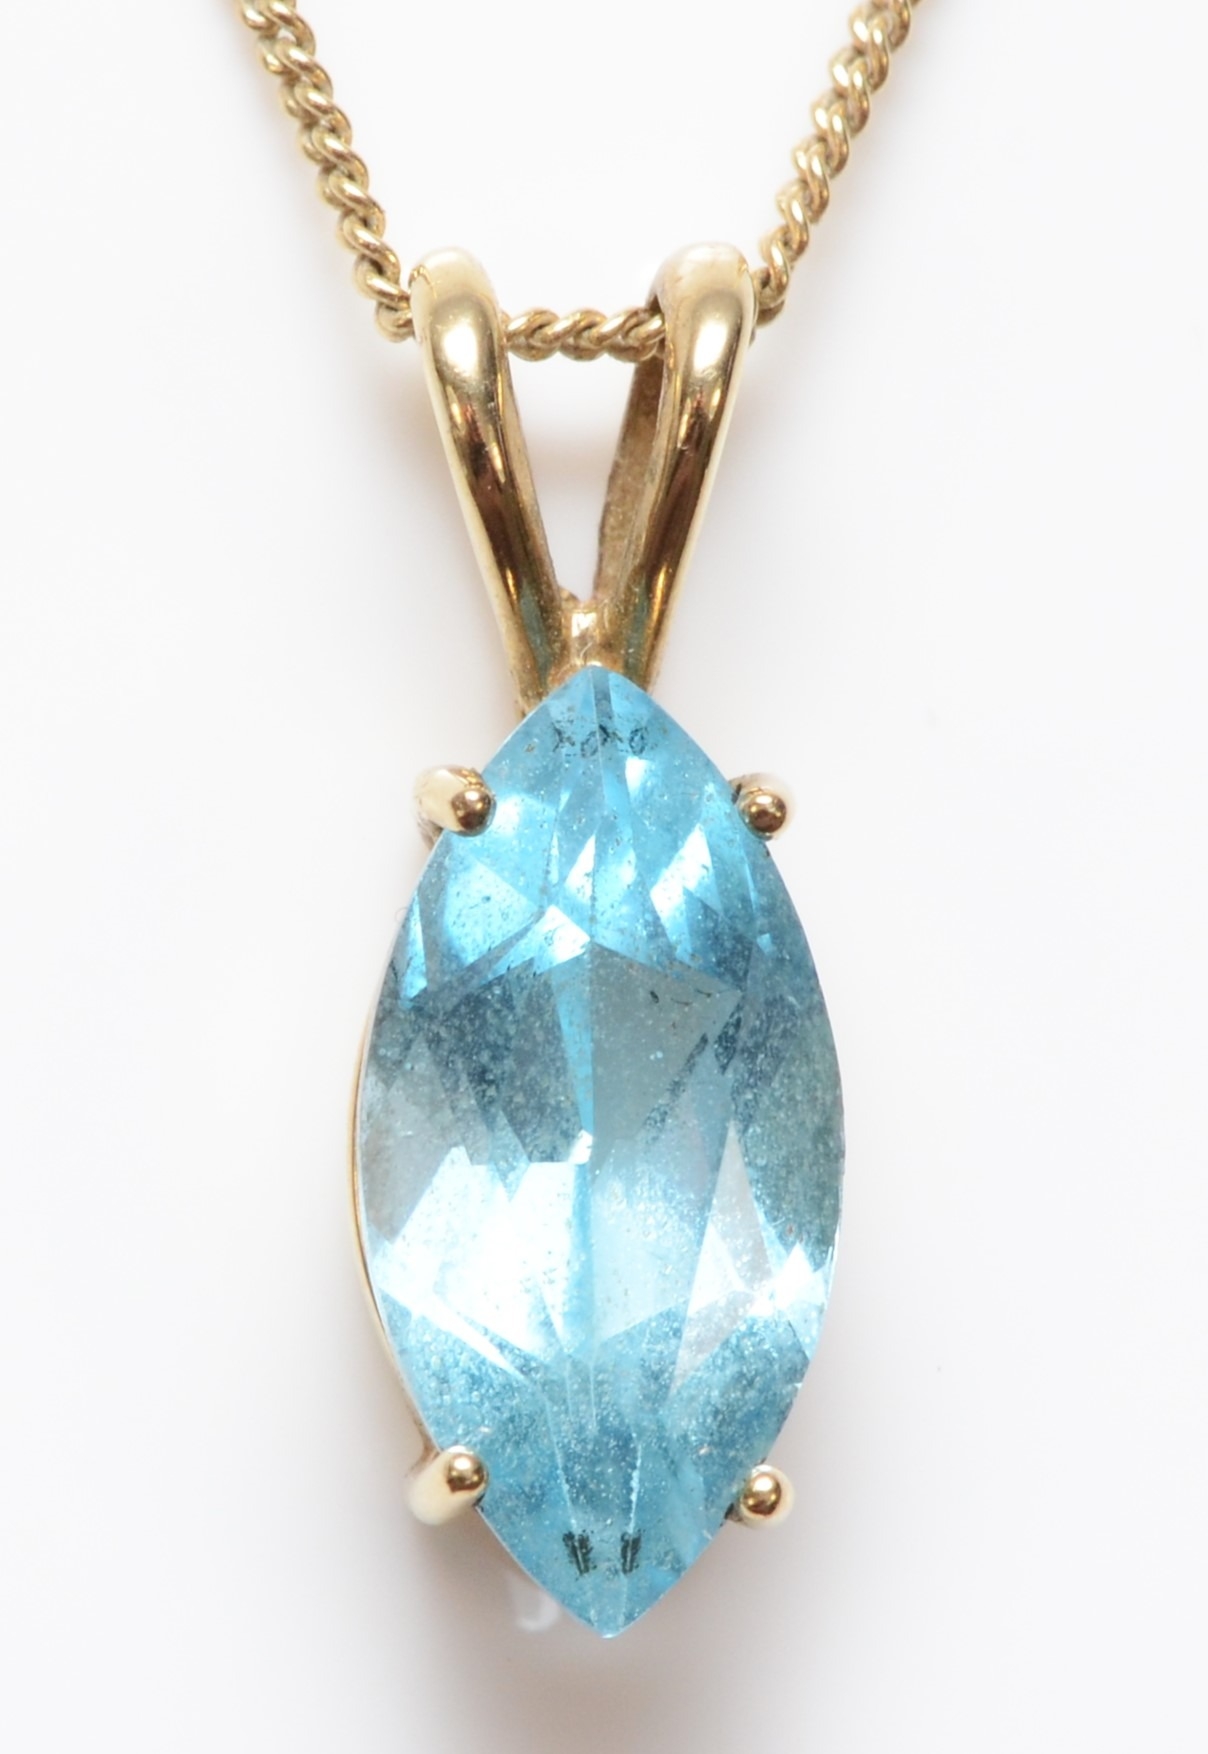 A 9ct gold and topaz pendant, stone 14 x 7mm, chain, 3gm